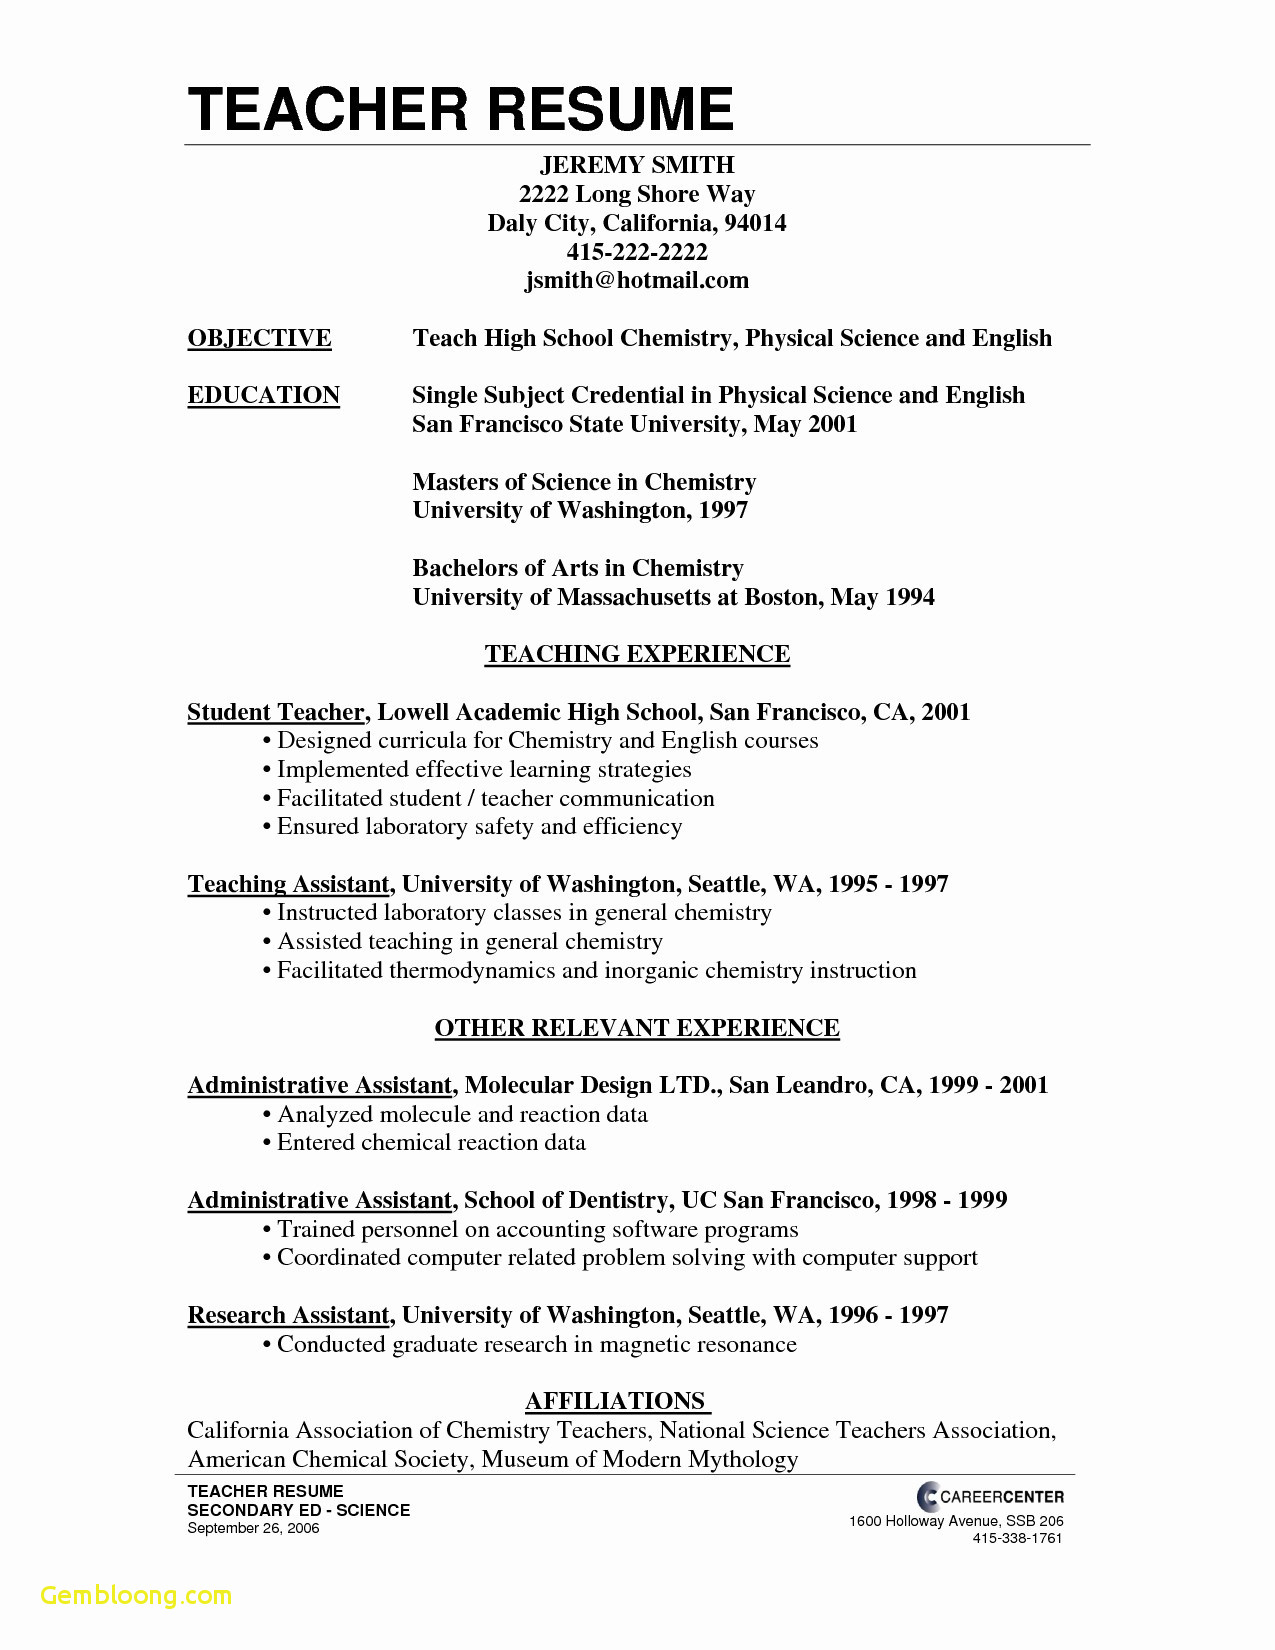 Cover Letter Template Doc Download - 25 Resume Examples Word Doc Free Sample Resume